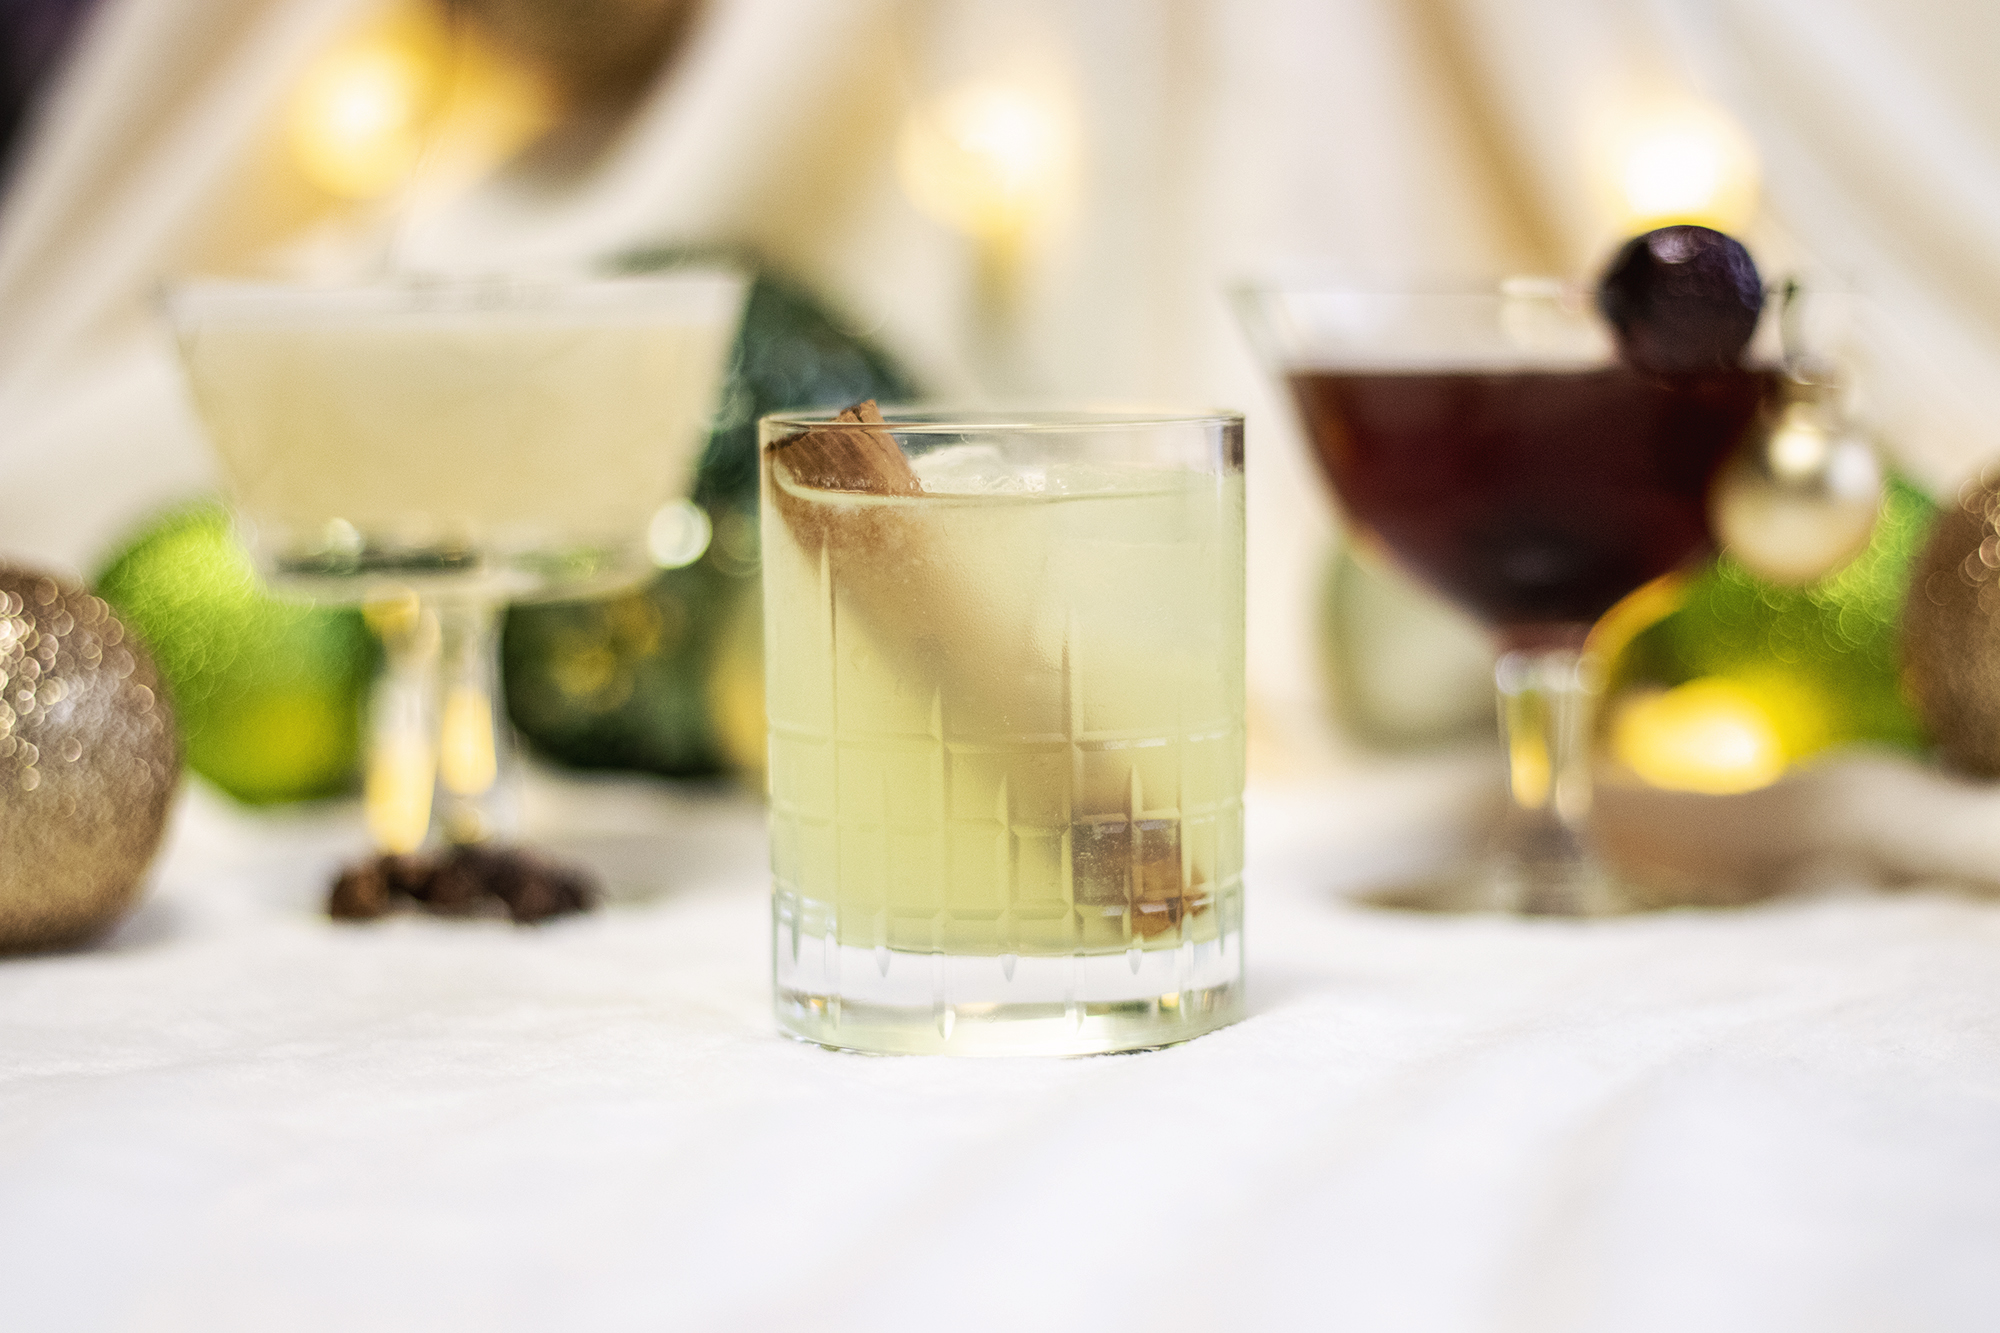 Happy Hour: The 3 Grappas of Christmas